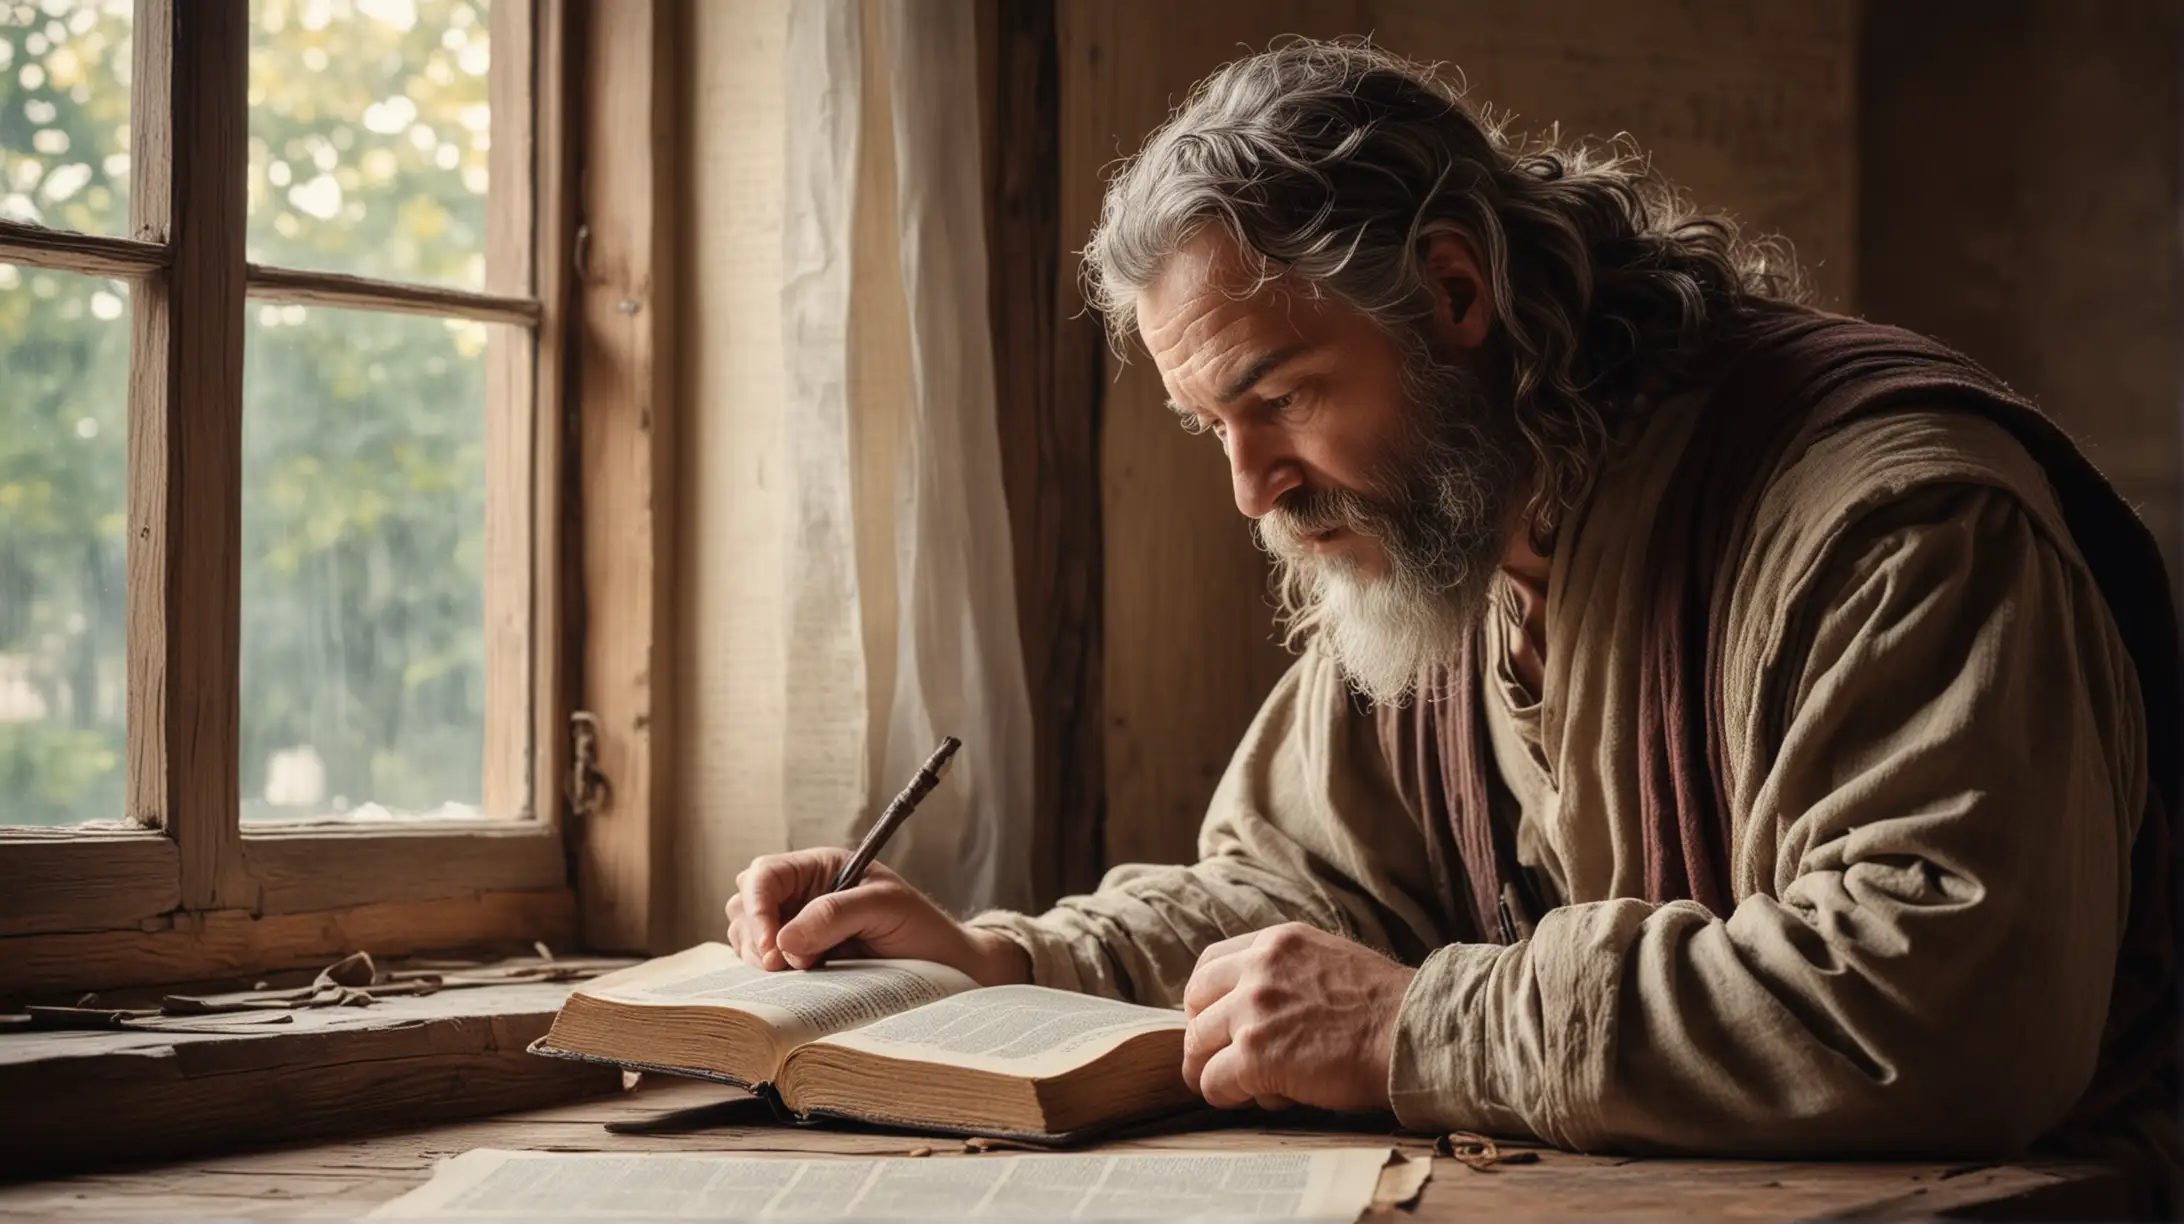 Middle Aged Nehemiah Studying Manuscript by Window